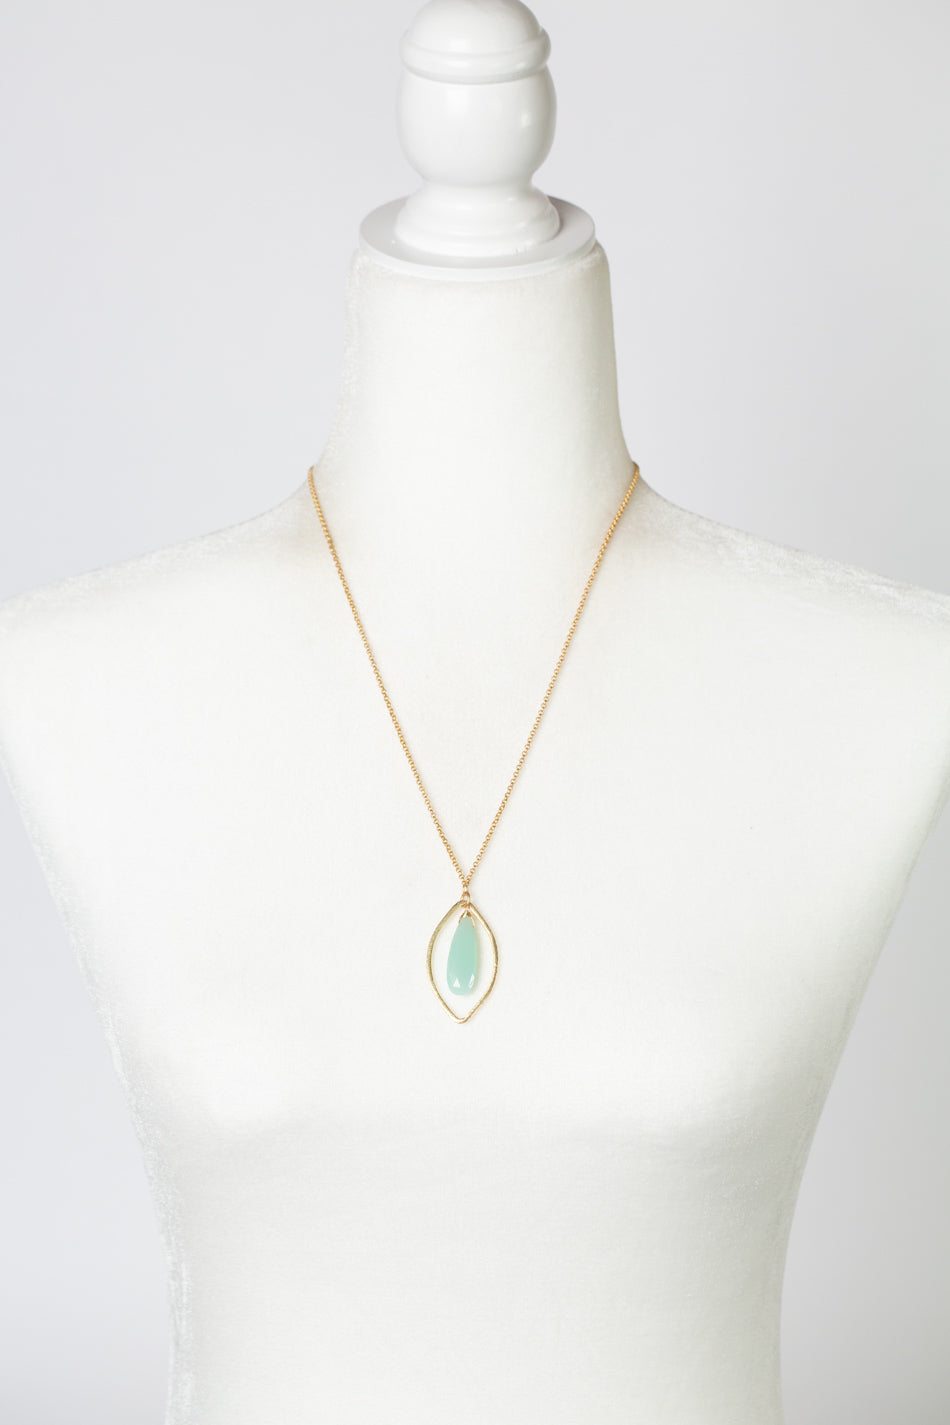 Limited Edition 20-22" Faceted Chalcedony Long Drop With Brushed Gold Oval Simple Necklace